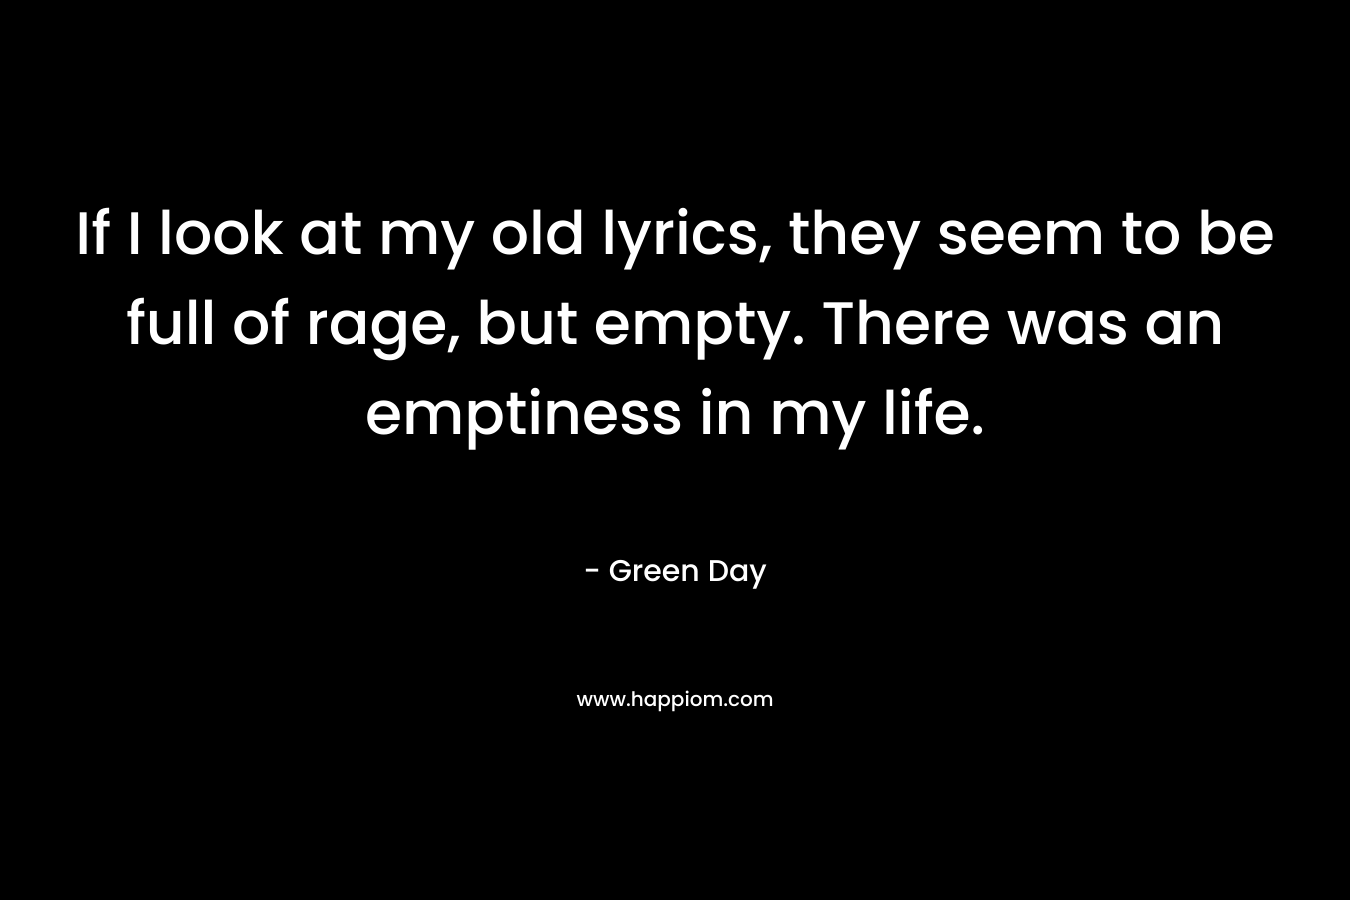 If I look at my old lyrics, they seem to be full of rage, but empty. There was an emptiness in my life. – Green Day